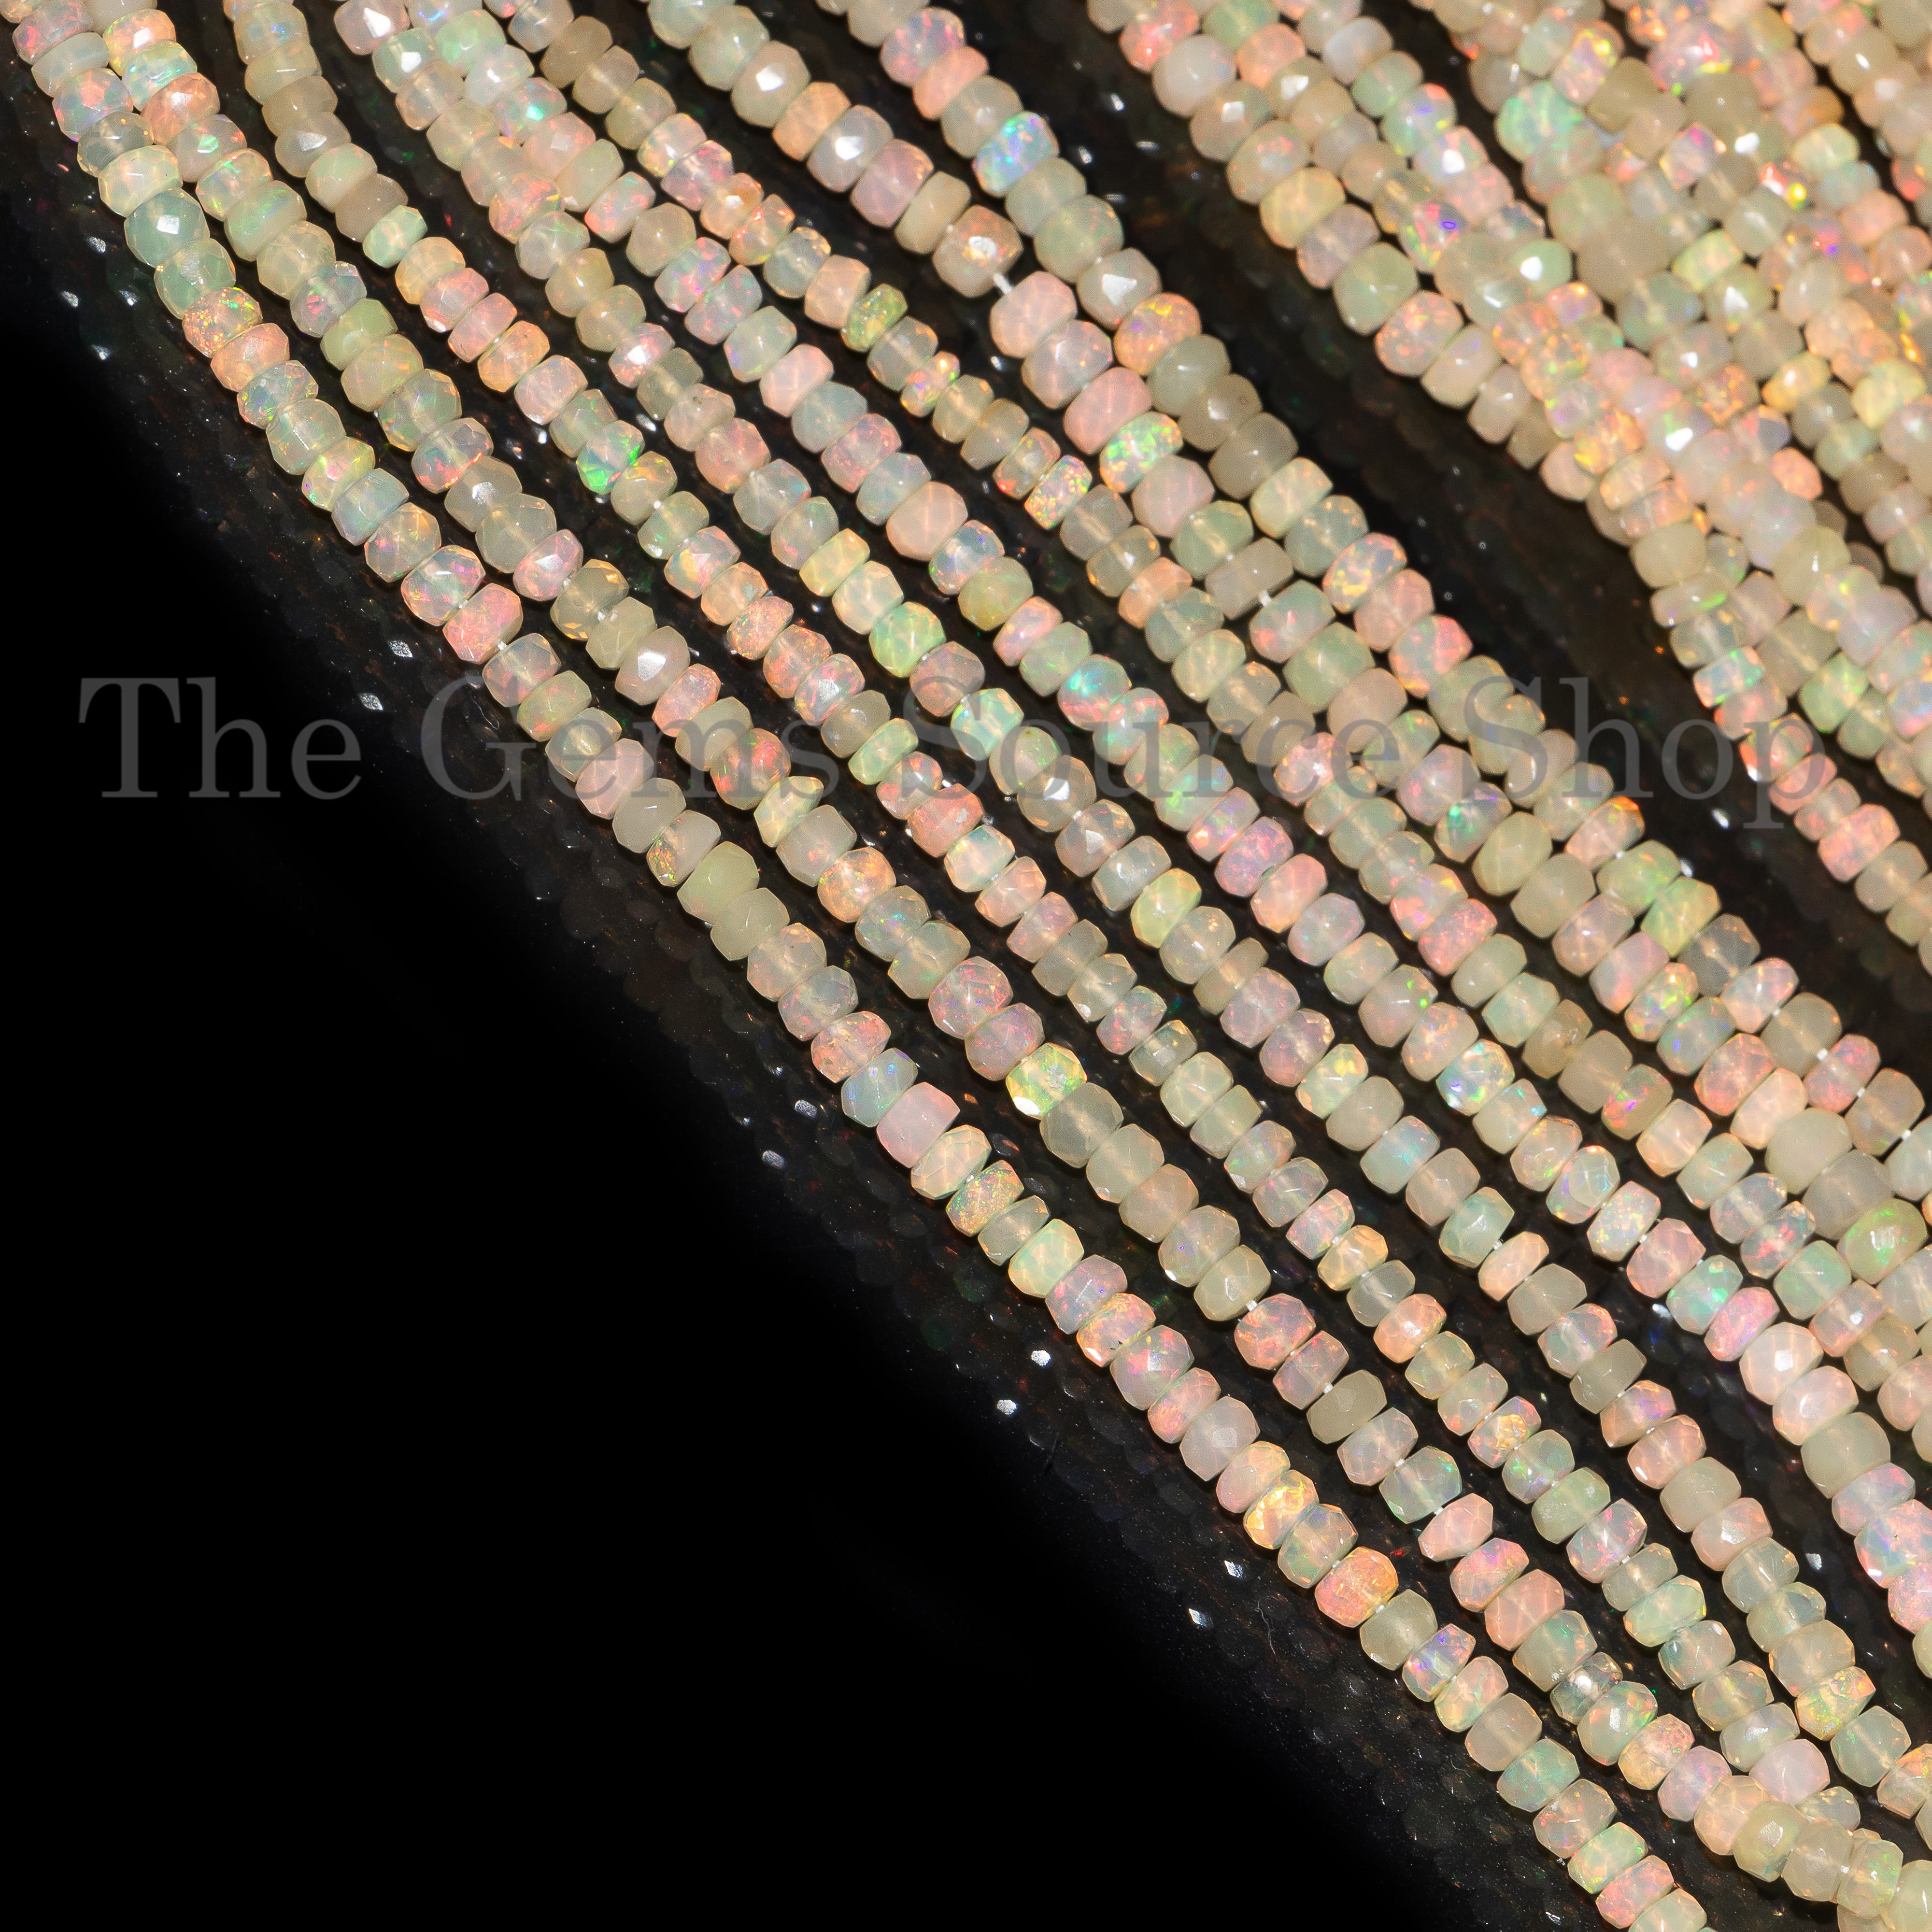 Ethiopian Opal Beads, Faceted Rondelle Opal Beads, Opal Faceted Beads, Gemstone Beads